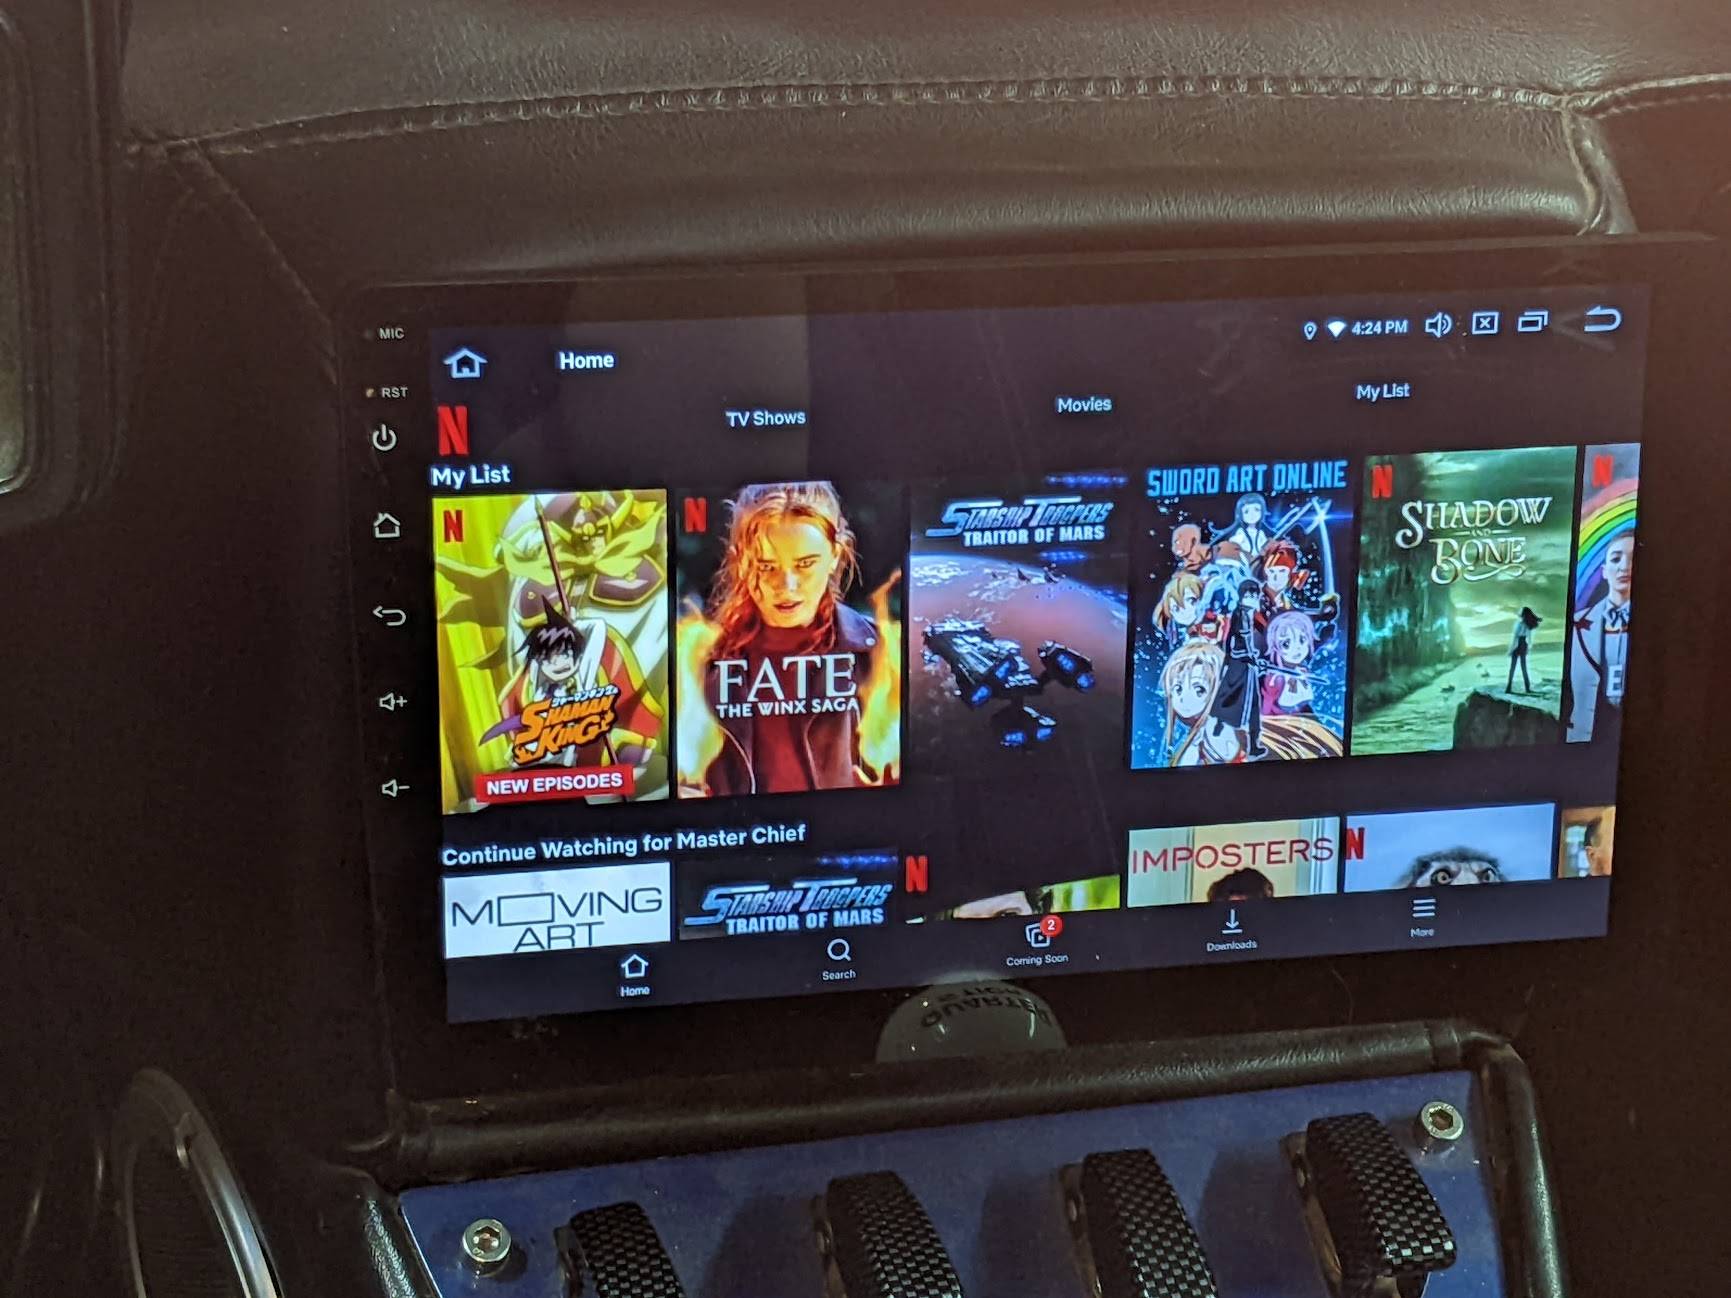 New Android head unit